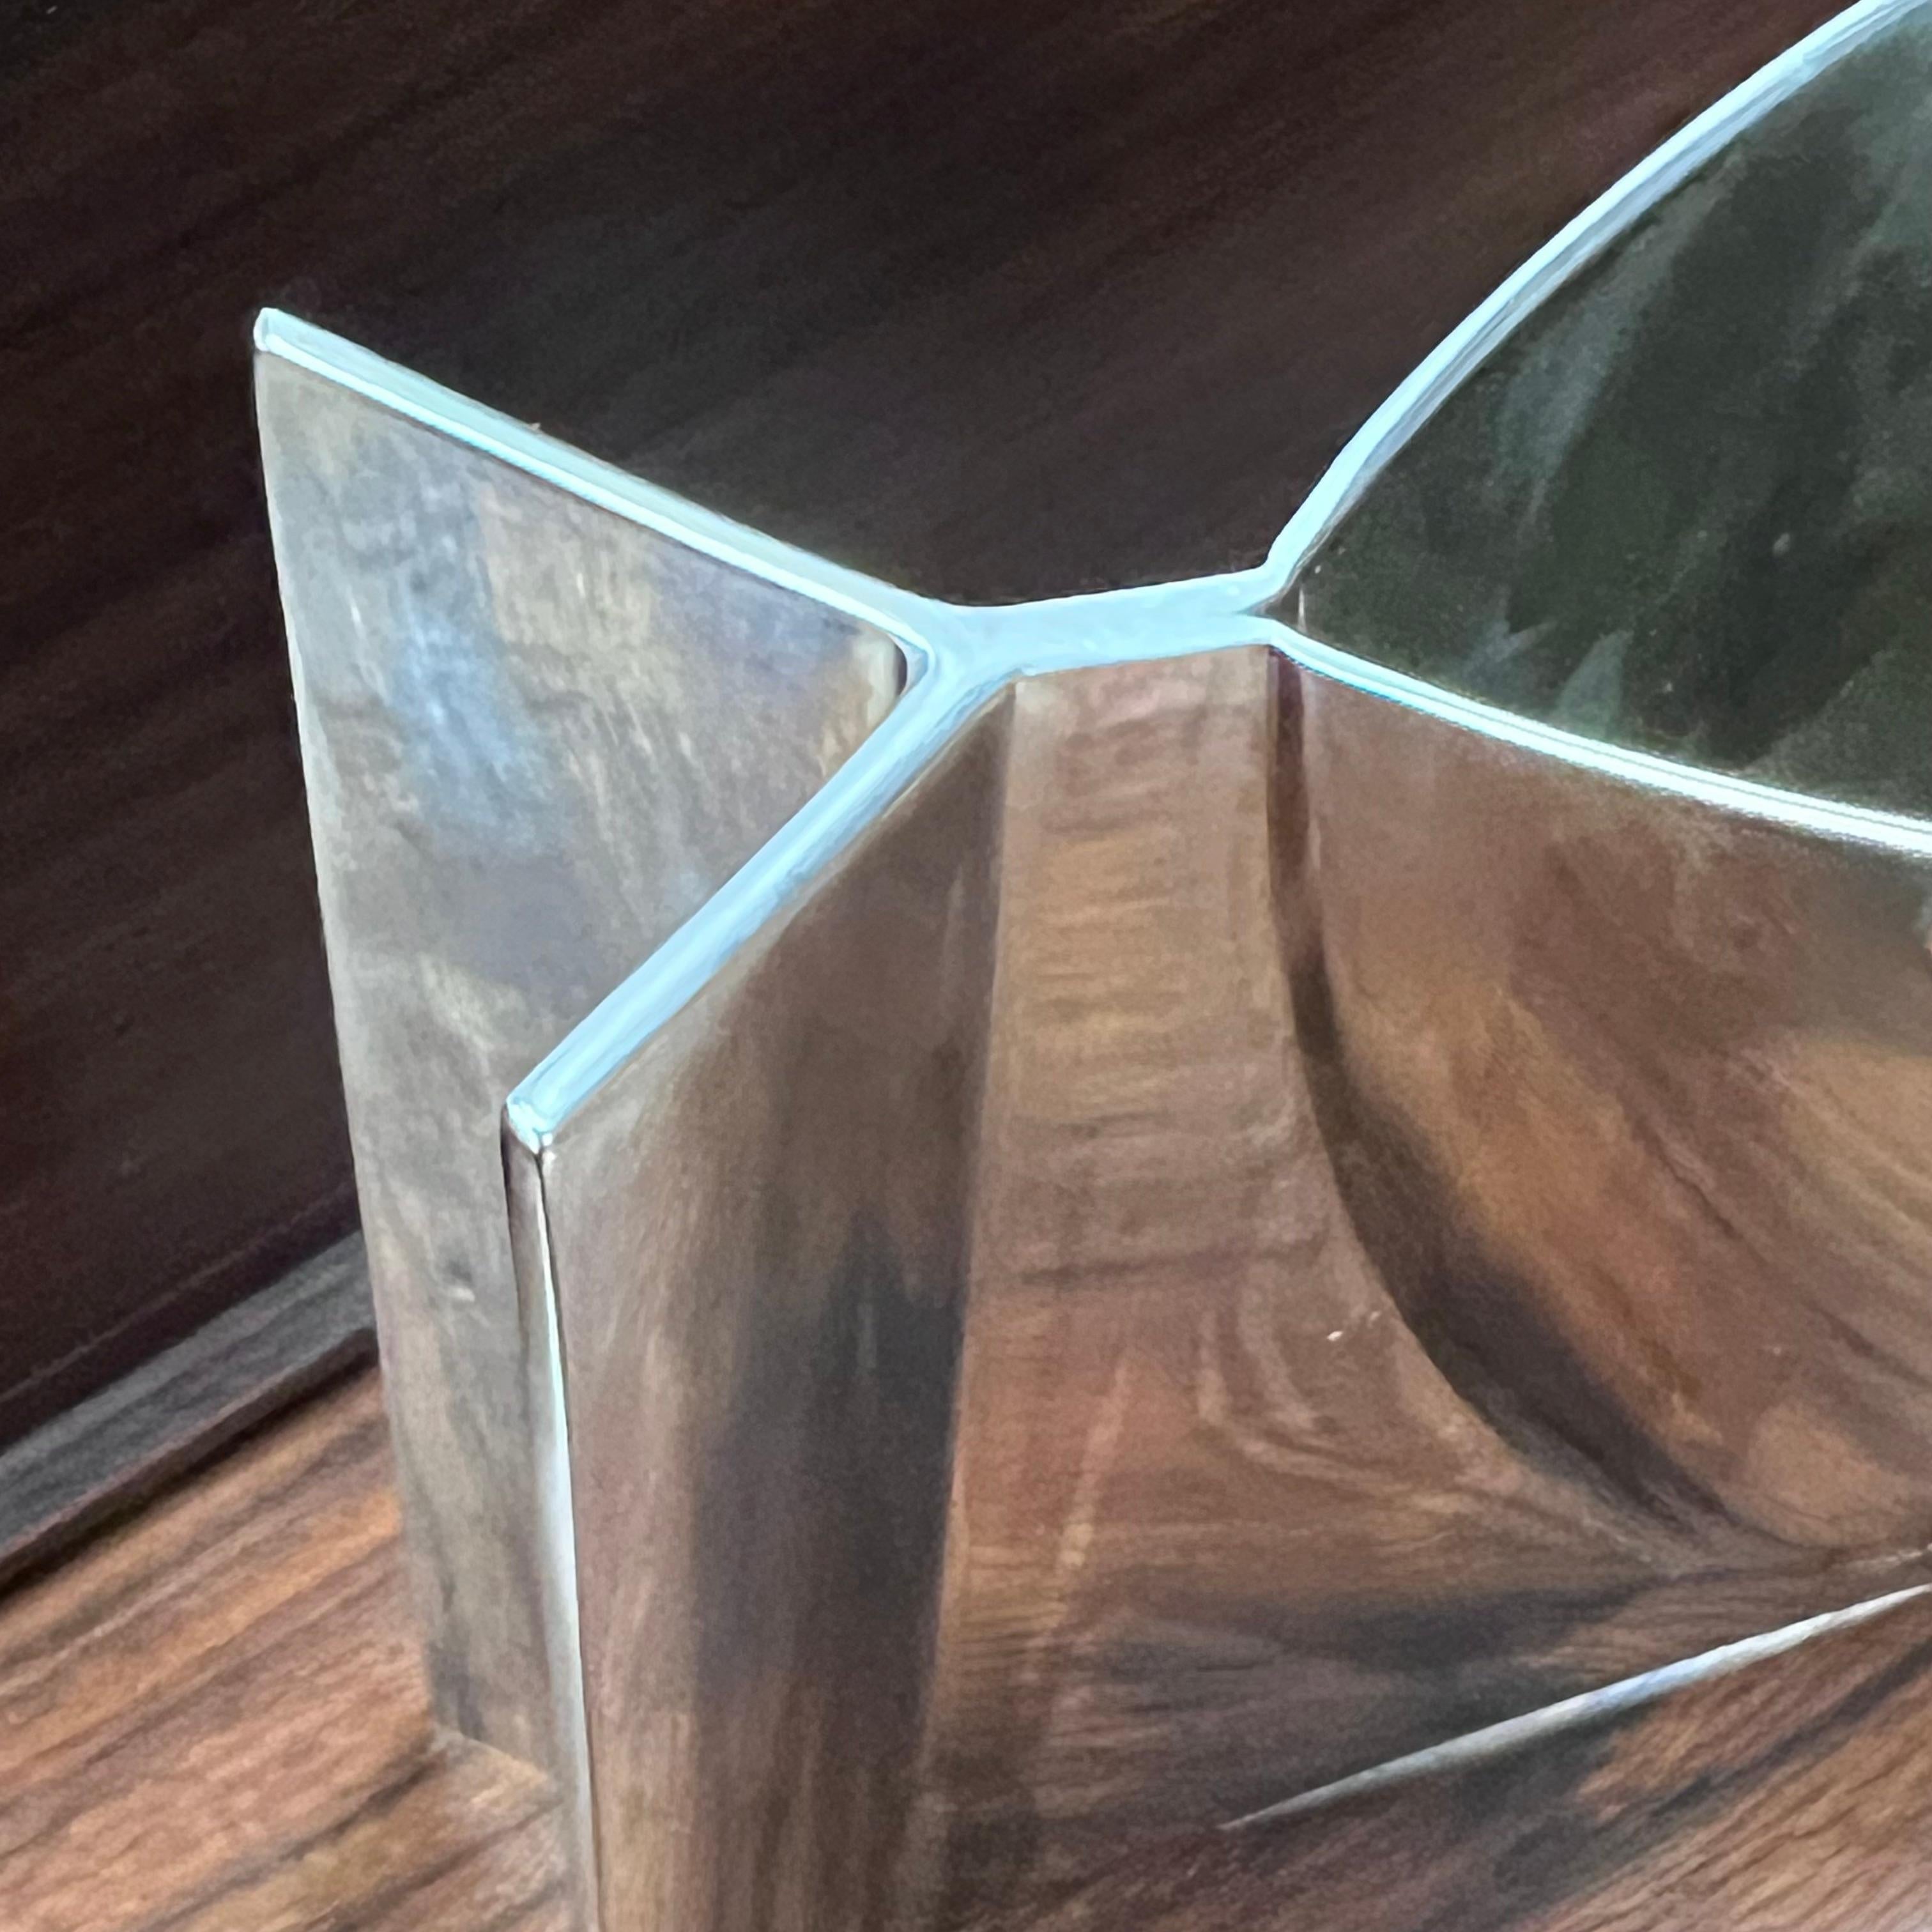 Steel Sculpture Vase by Davorin Horvat for Zepter - Austria - 1990s In Excellent Condition For Sale In Milano, IT